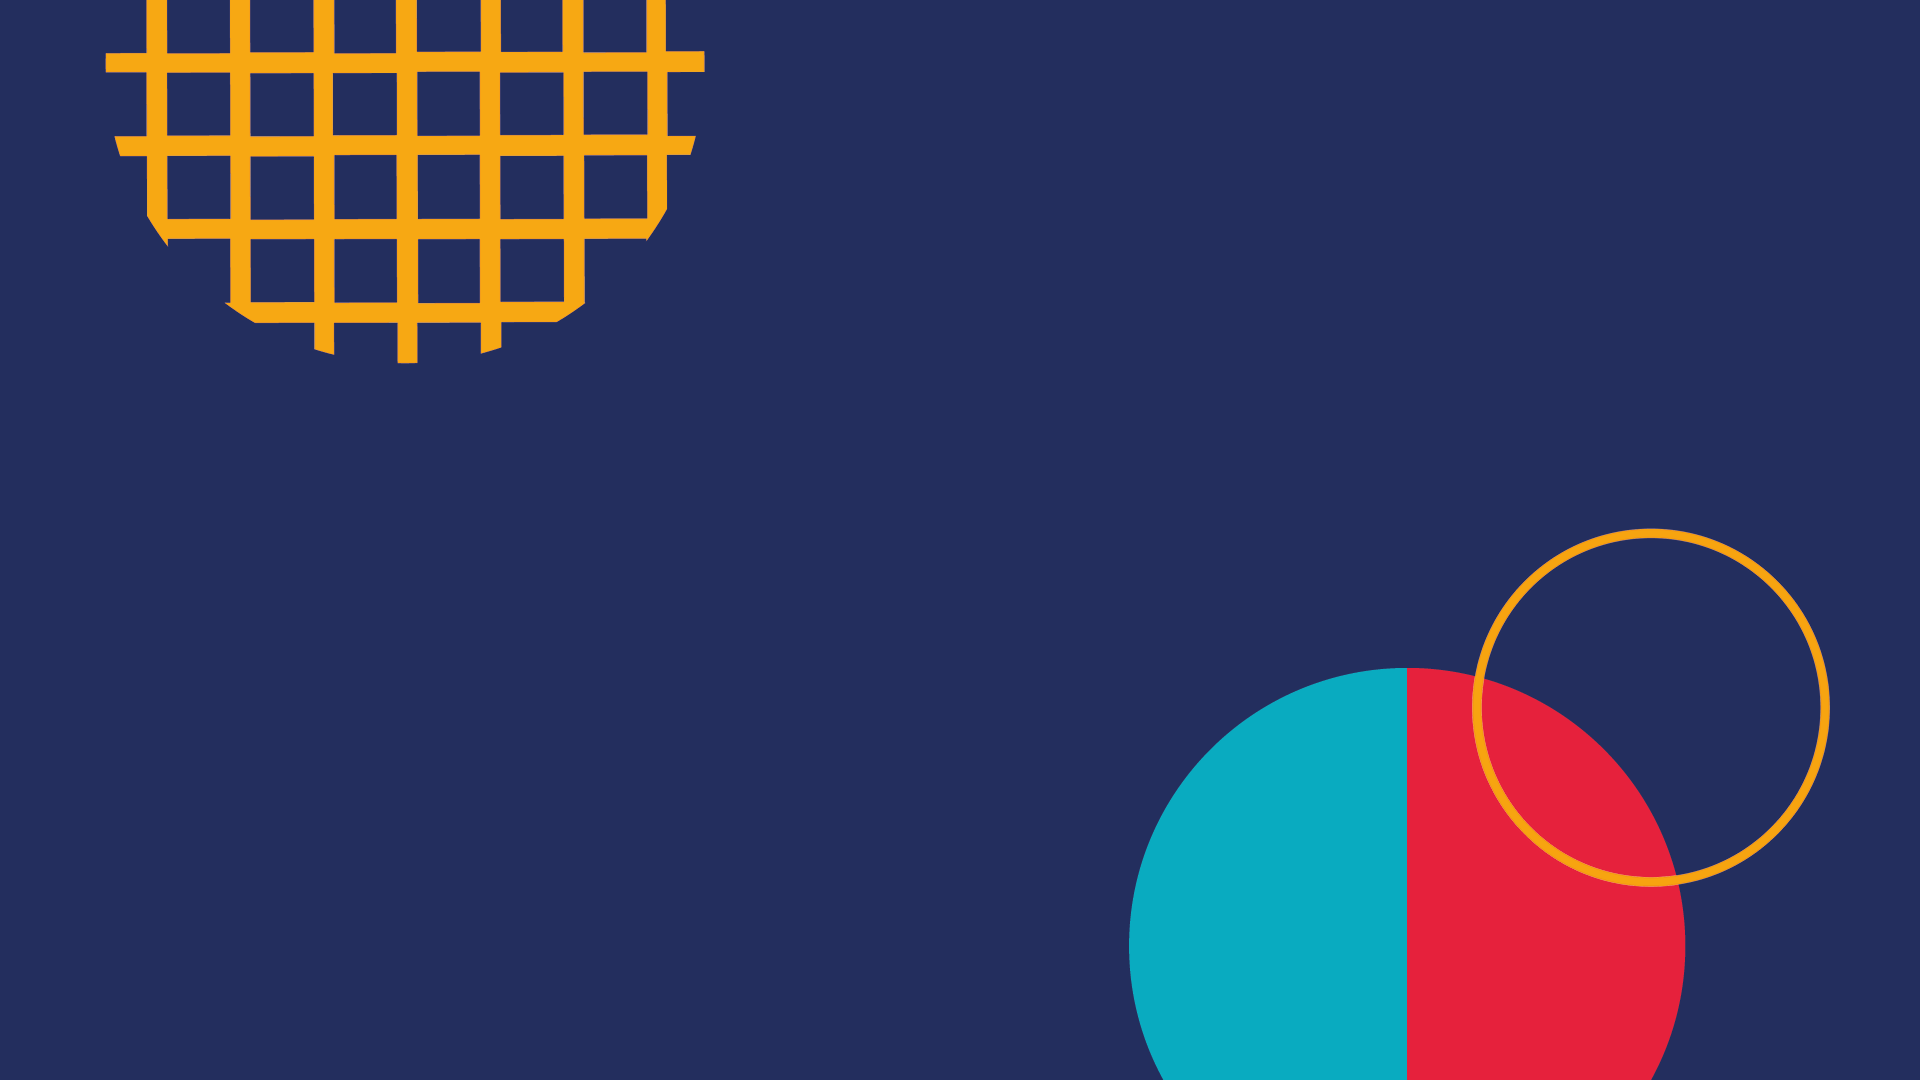 Image with dark blue, navy, red and yellow shapes.